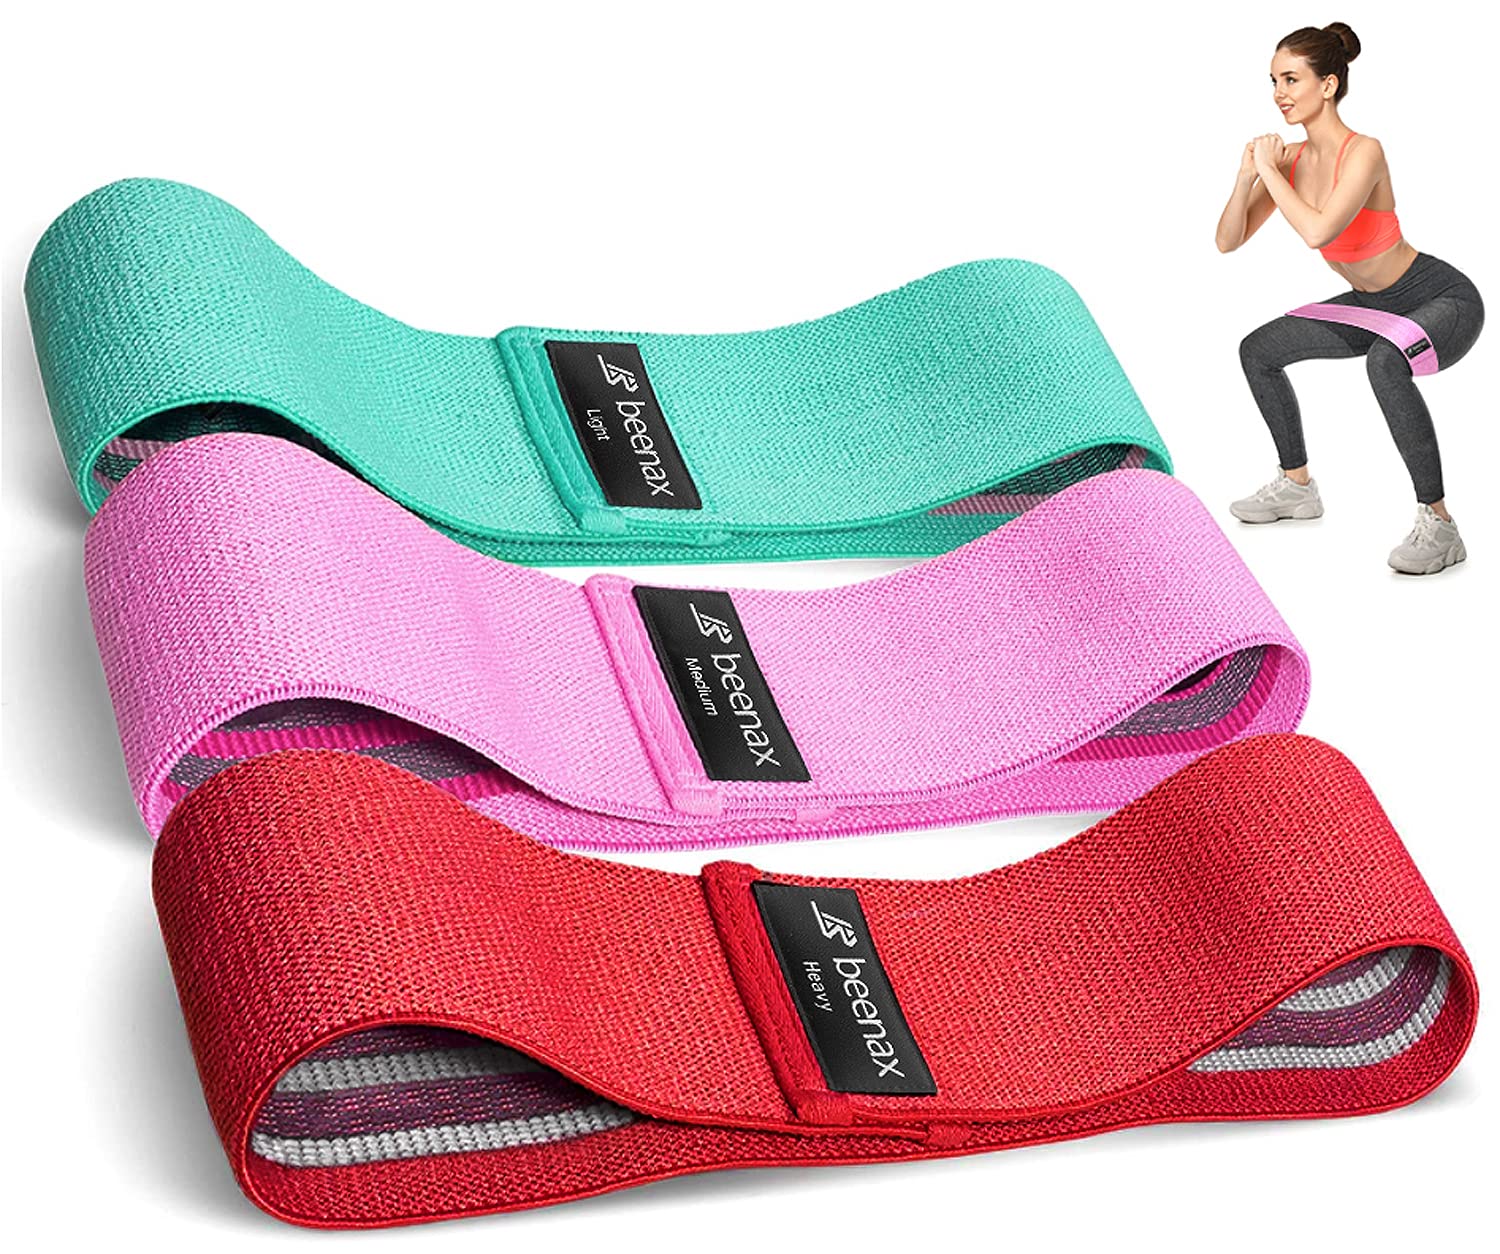 Beenax Resistance Bands 3 Sets - Exercise Loops with Non-Slip Design for Glutes & Hips - 3 Resistance Workout Levels, Booty Bands for Women, Home Fitness, Pilates & Yoga